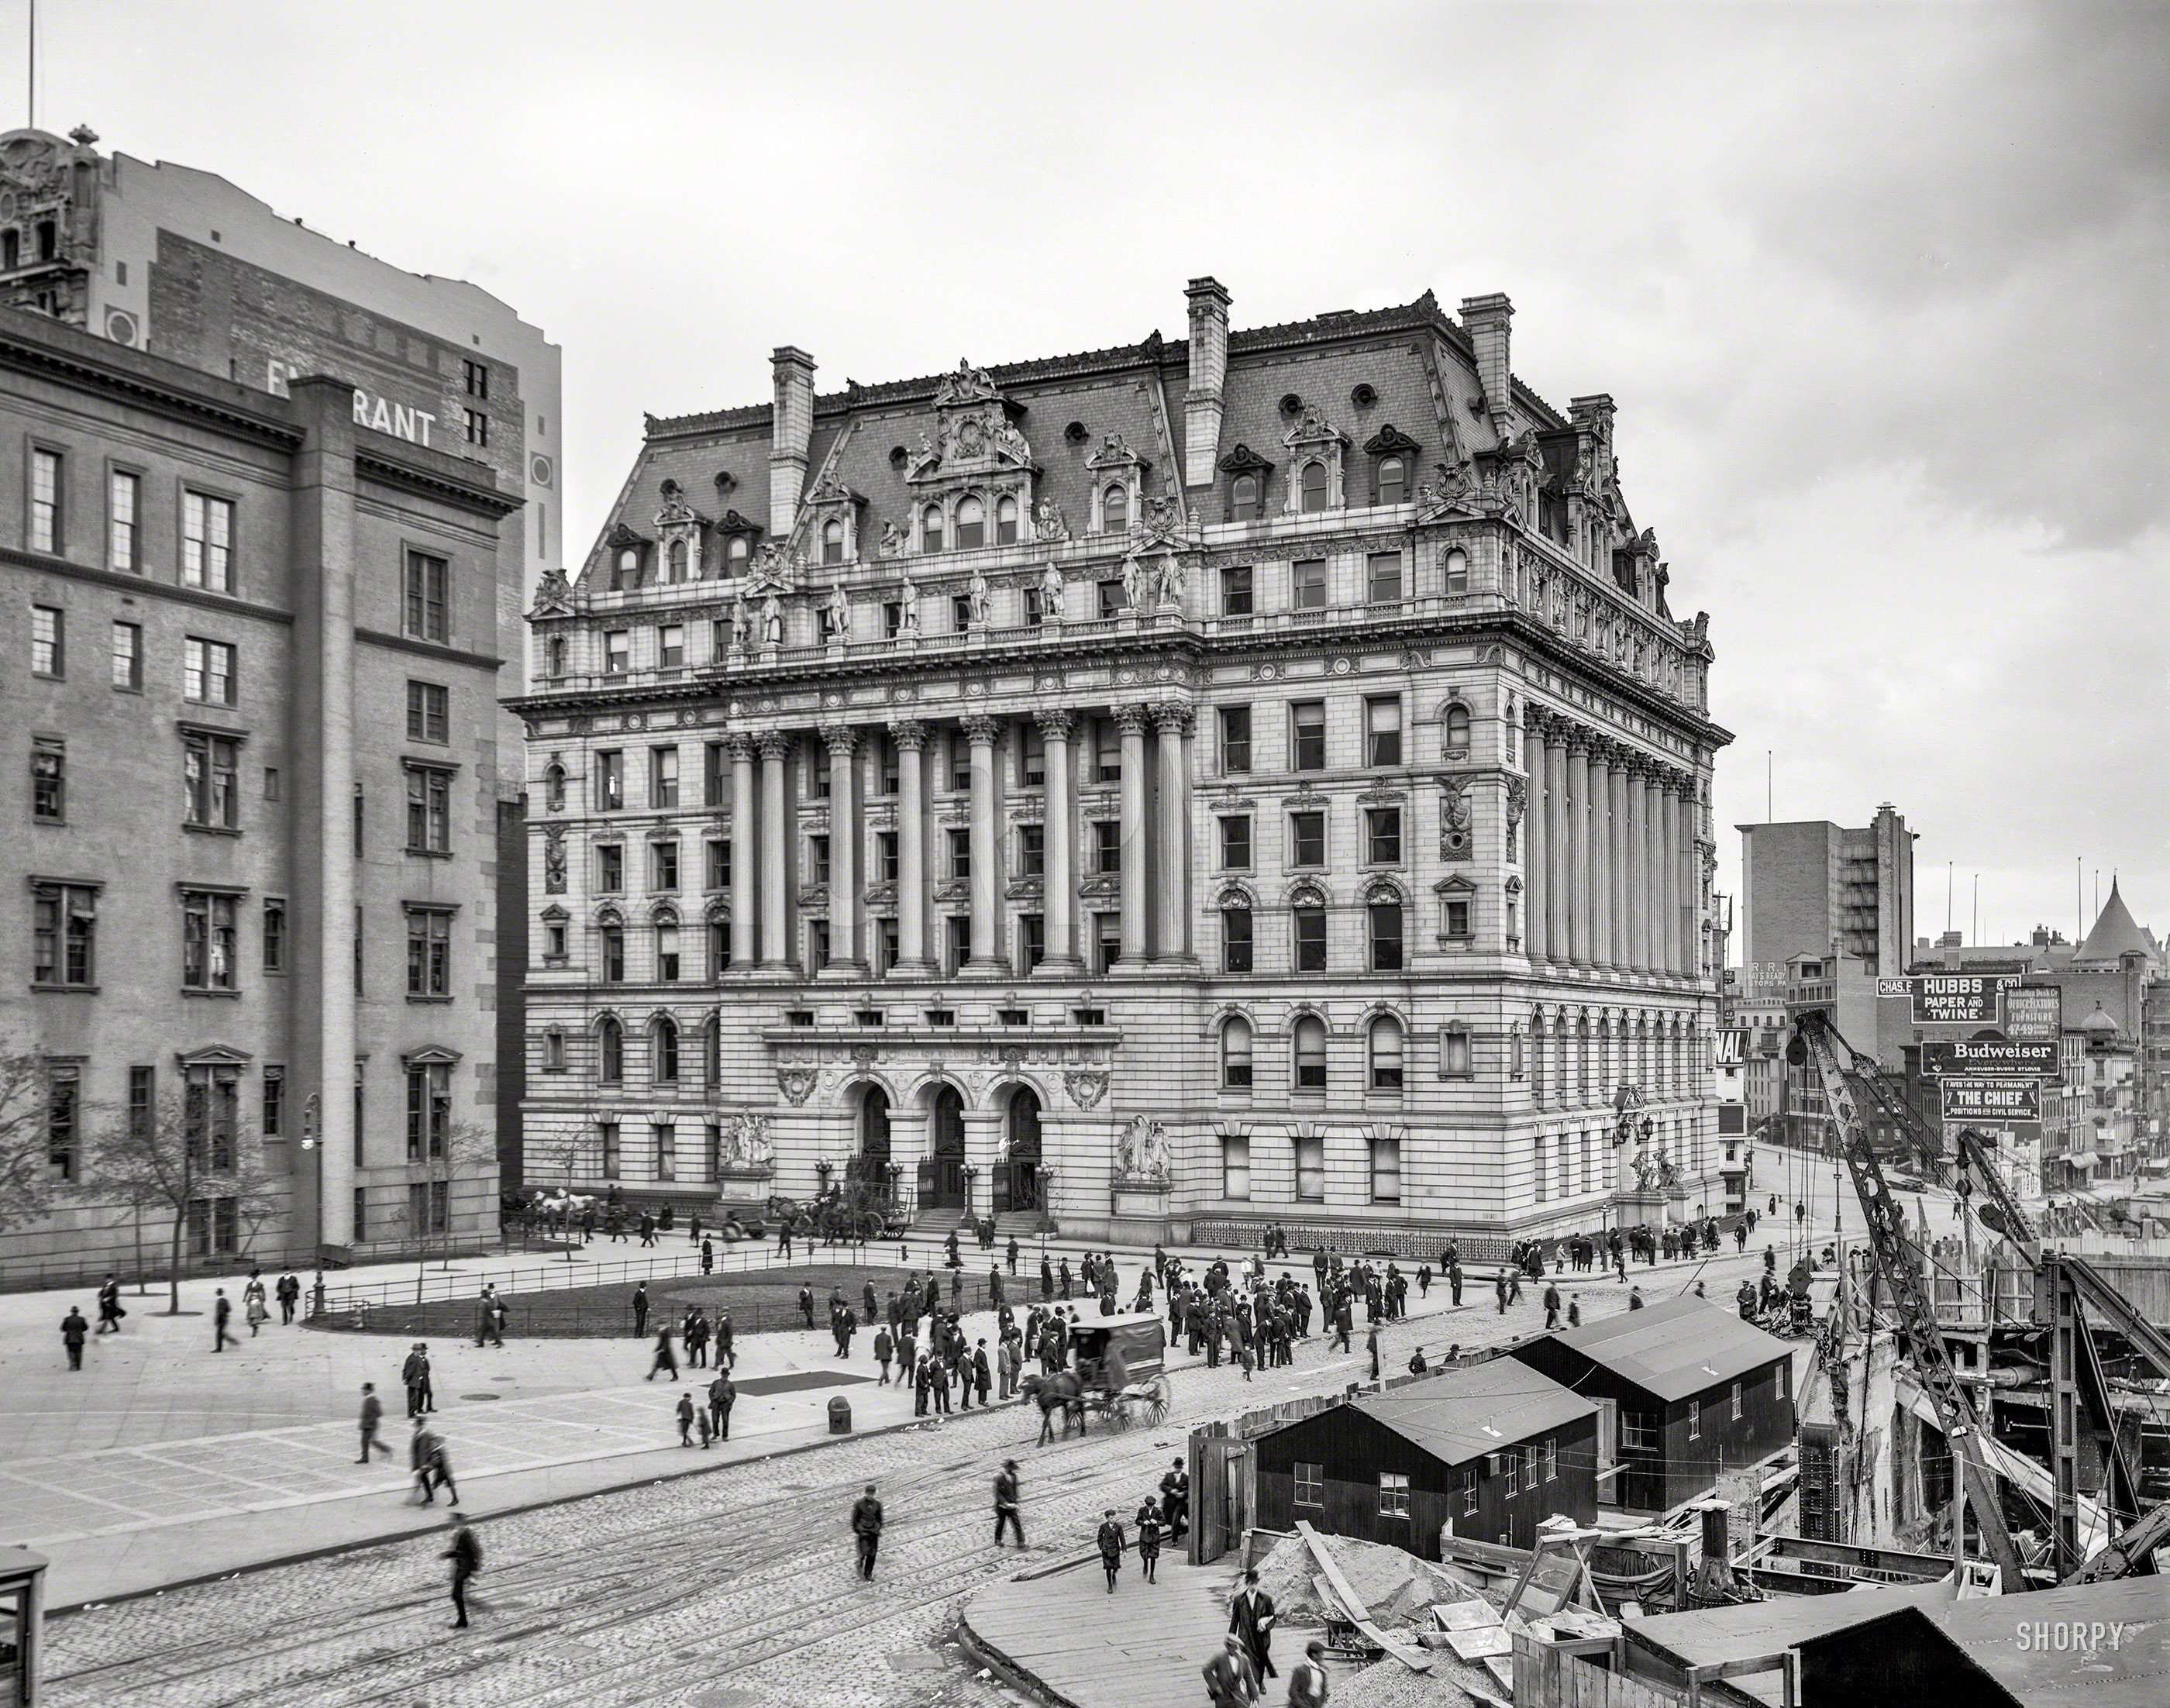 Circa 1910. "Hall of Records (Surrogate's Courthouse), New York, N.Y." 8x10 inch dry plate glass negative, Detroit Publishing Company. View full size.